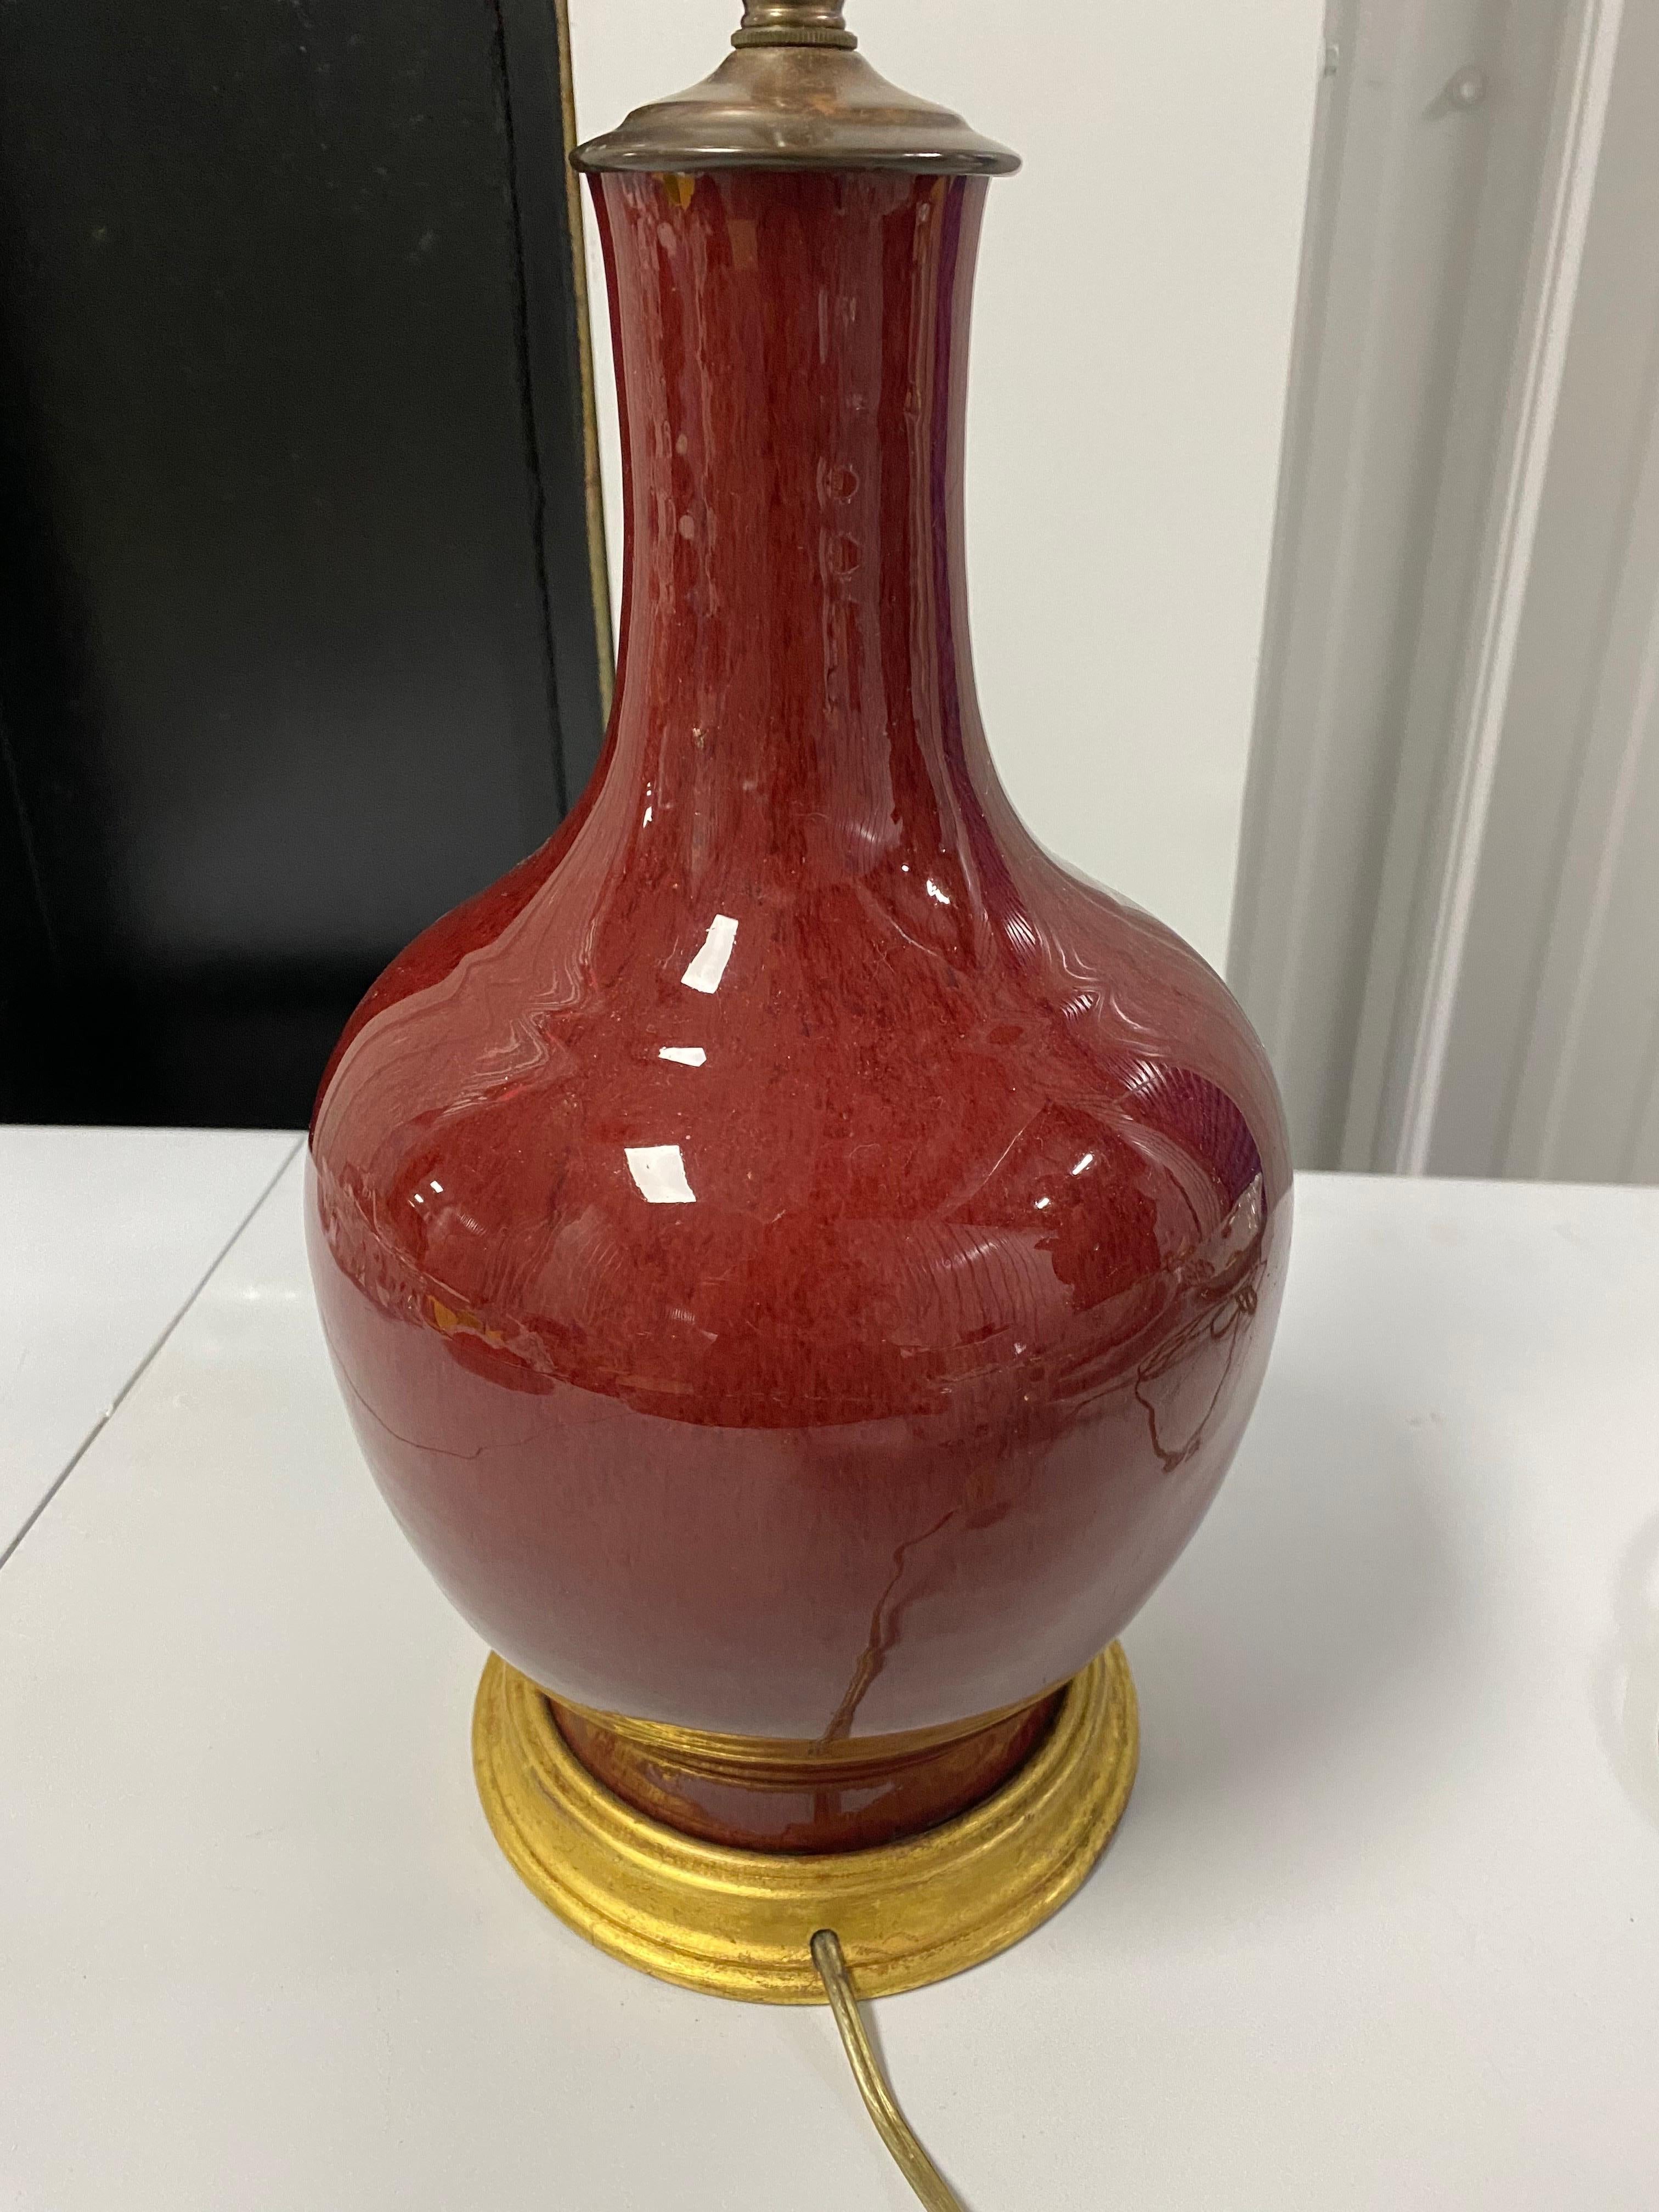 Ceramic Chinese Sang-de-Boeuf Glazed Red Vase Made into Lamp, c. 19th century For Sale